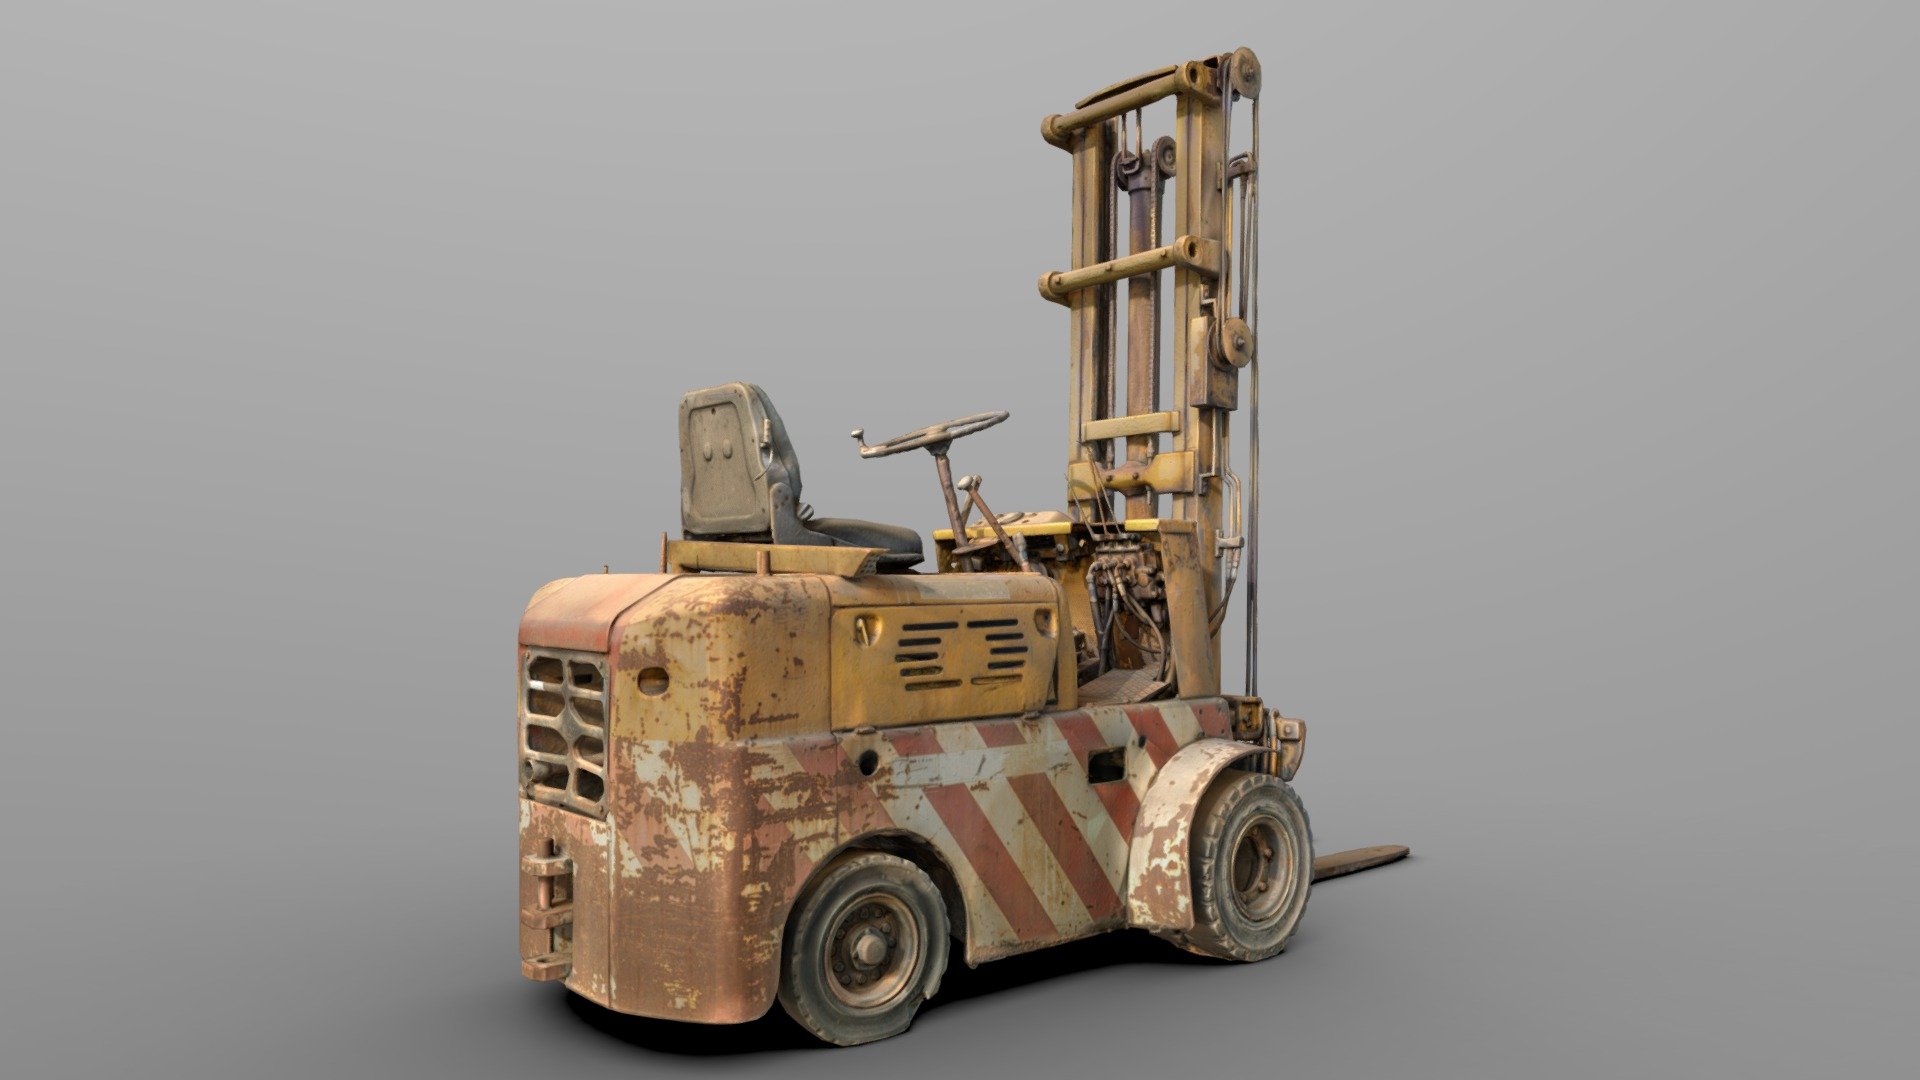 A decimated cleaner version of an old rusty and dusty fork lift. This came out after a massive raw photogrammetry scan I did a while ago, I reprocessed it focusing more on the lift itself and with a slightly different method and set of photos (1600 x45MP photos). There is a little bonus, a shovel just hanging there, I decided to keep it.

2x 8K textures, diffuse de-lighed, occlusion and normals from a 50M poly version

Personally I think a somewhat higher poly count would be better, let me know if it's something you'd like to see 3d model